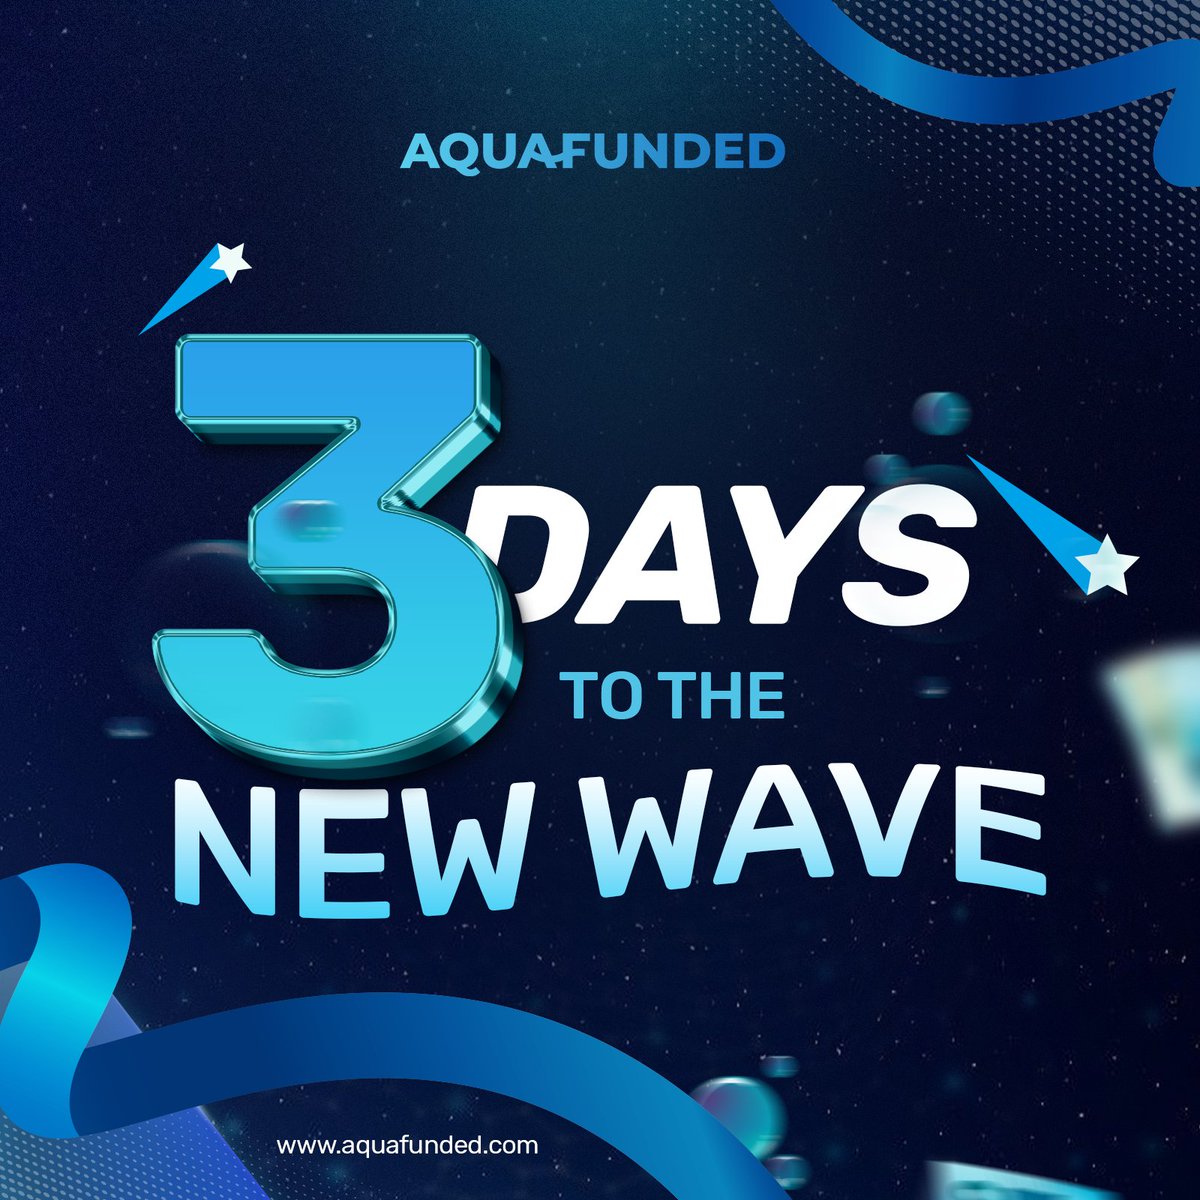 🌊 3 DAYS TO THE NEW WAVE 🌊 We are about to enhance all aspects of AquaFunded Today we are hosting 5 x $10k YouTube Giveaway 1️⃣ Follow @AquaFunded & enable notifications 2️⃣ Like, Retweet & Tag 3 traders 3️⃣ Watch our interview and subscribe youtu.be/Ur1U9W1x_Ks?si…